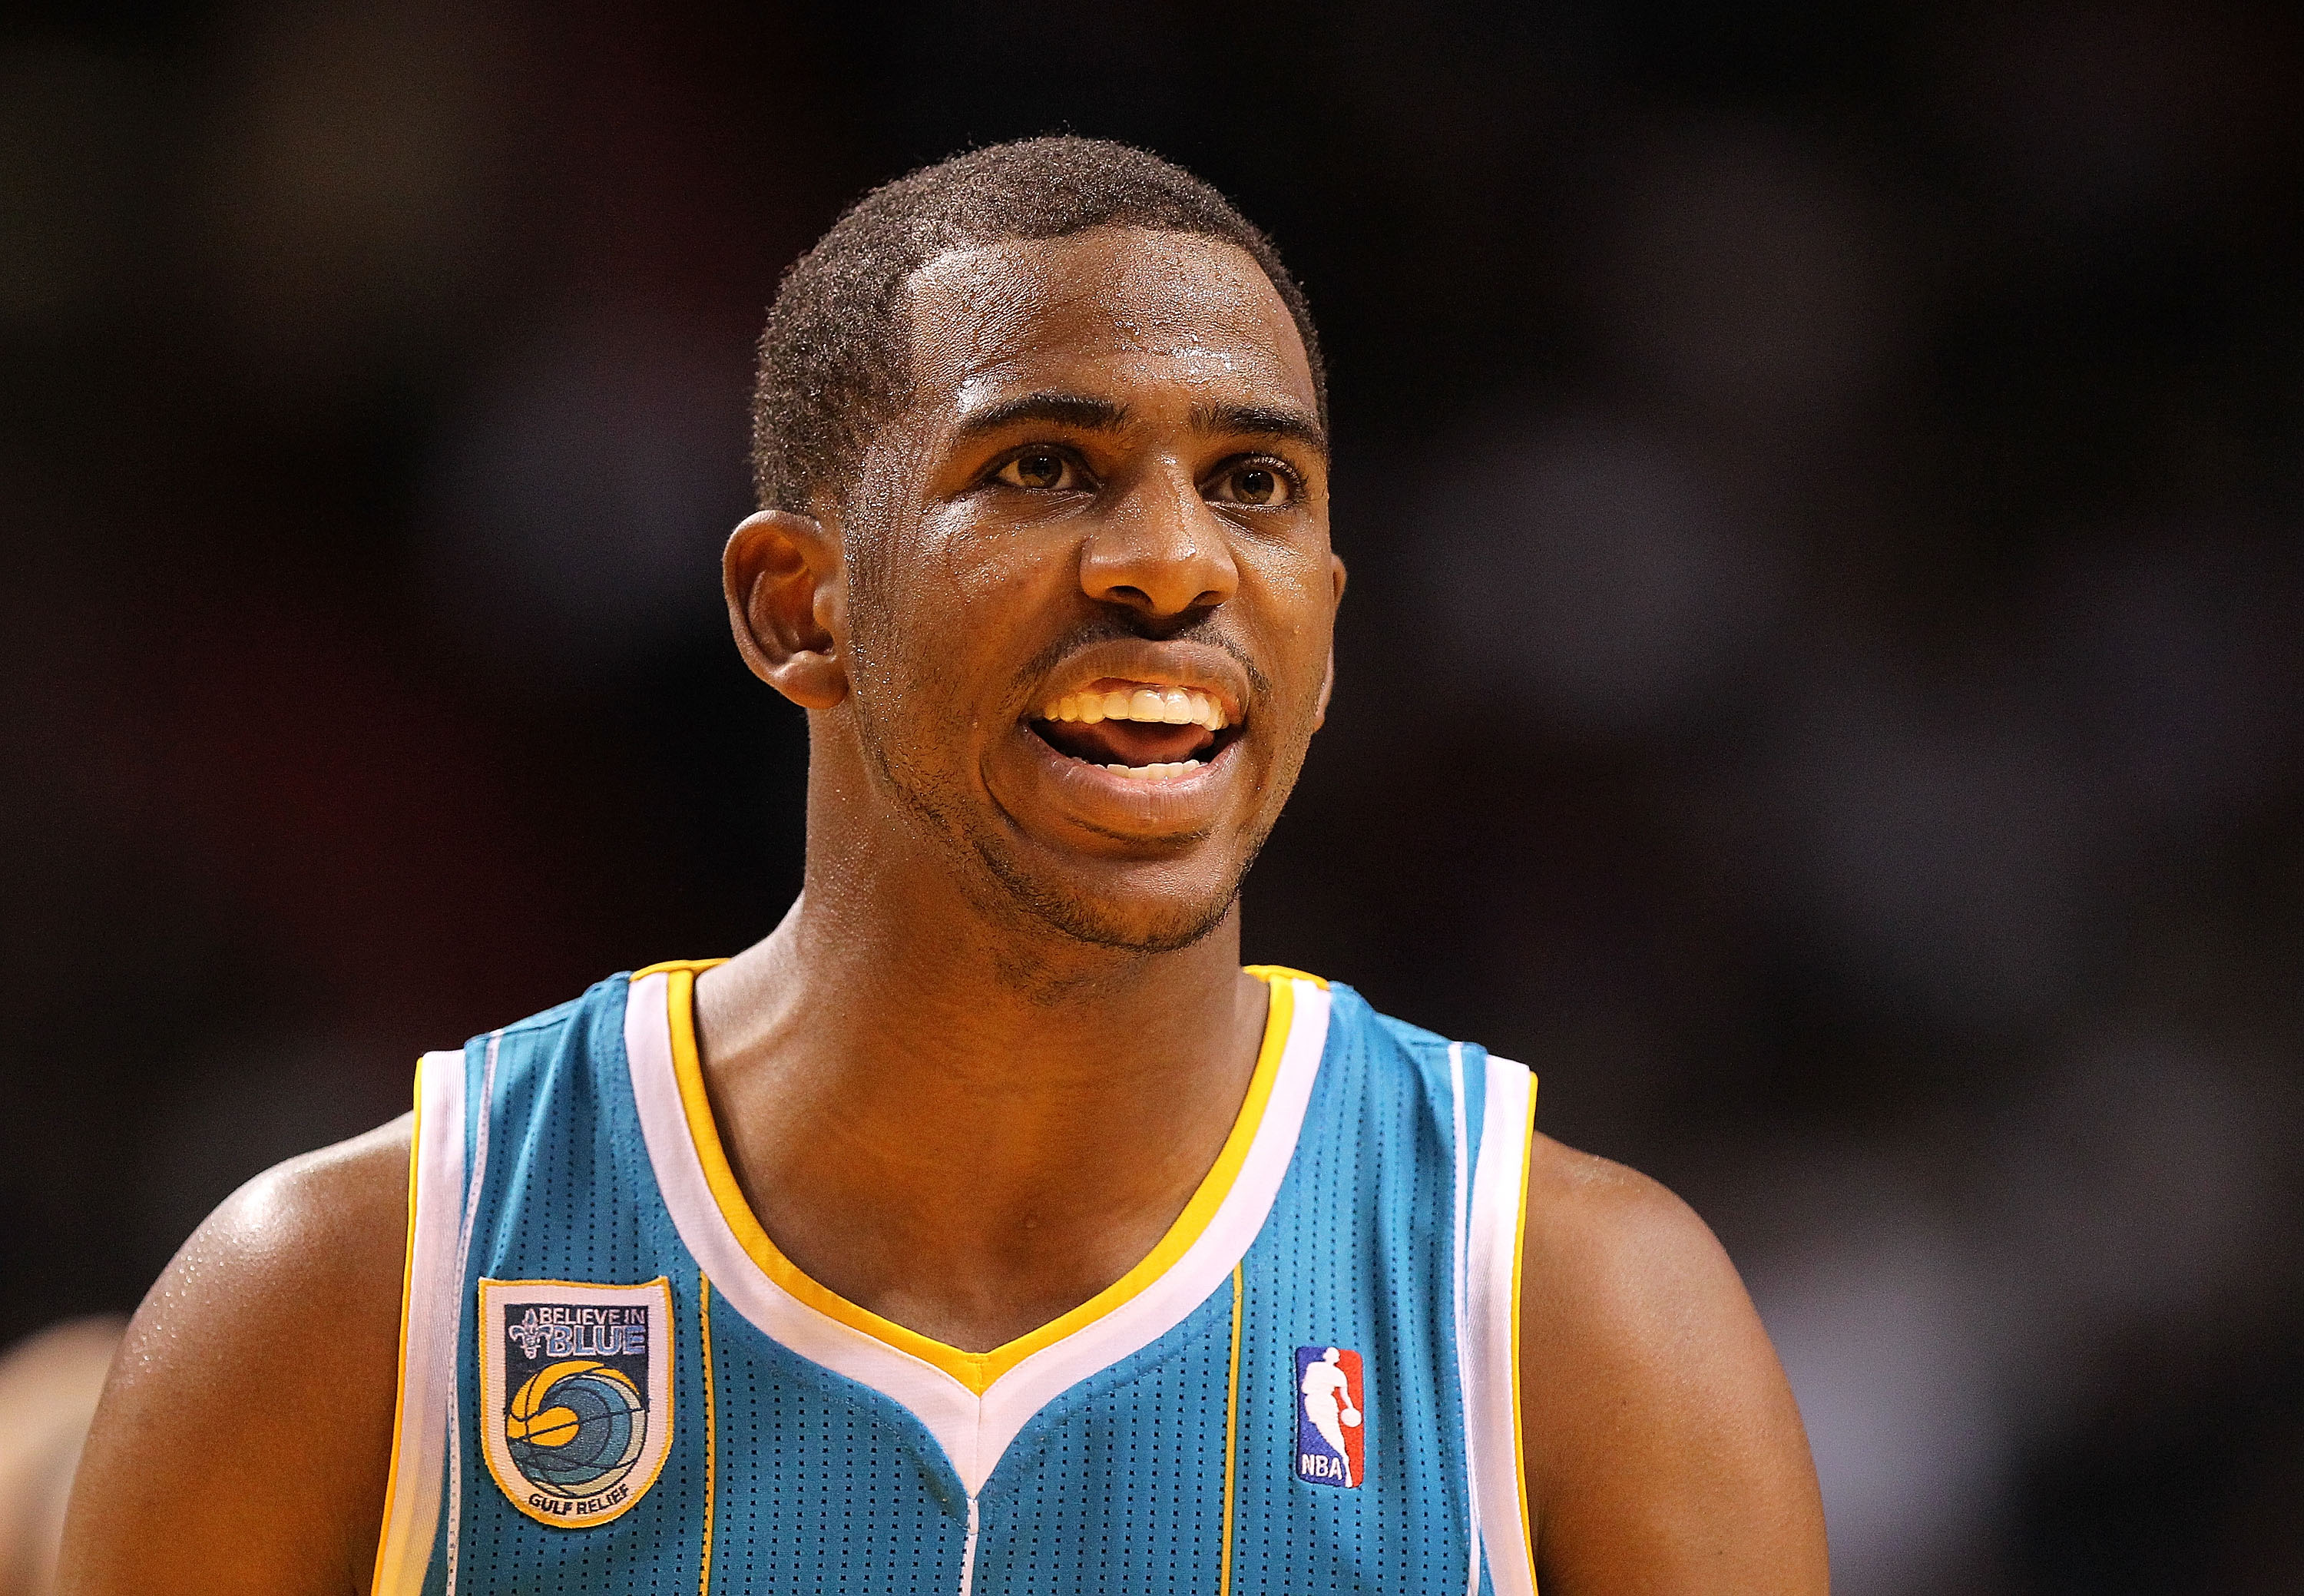 MIAMI, FL - DECEMBER 13:  Chris Paul #3 of the New Orleans Hornets waits during a foul shot during a game against the Miami Heat at American Airlines Arena on December 13, 2010 in Miami, Florida. NOTE TO USER: User expressly acknowledges and agrees that,